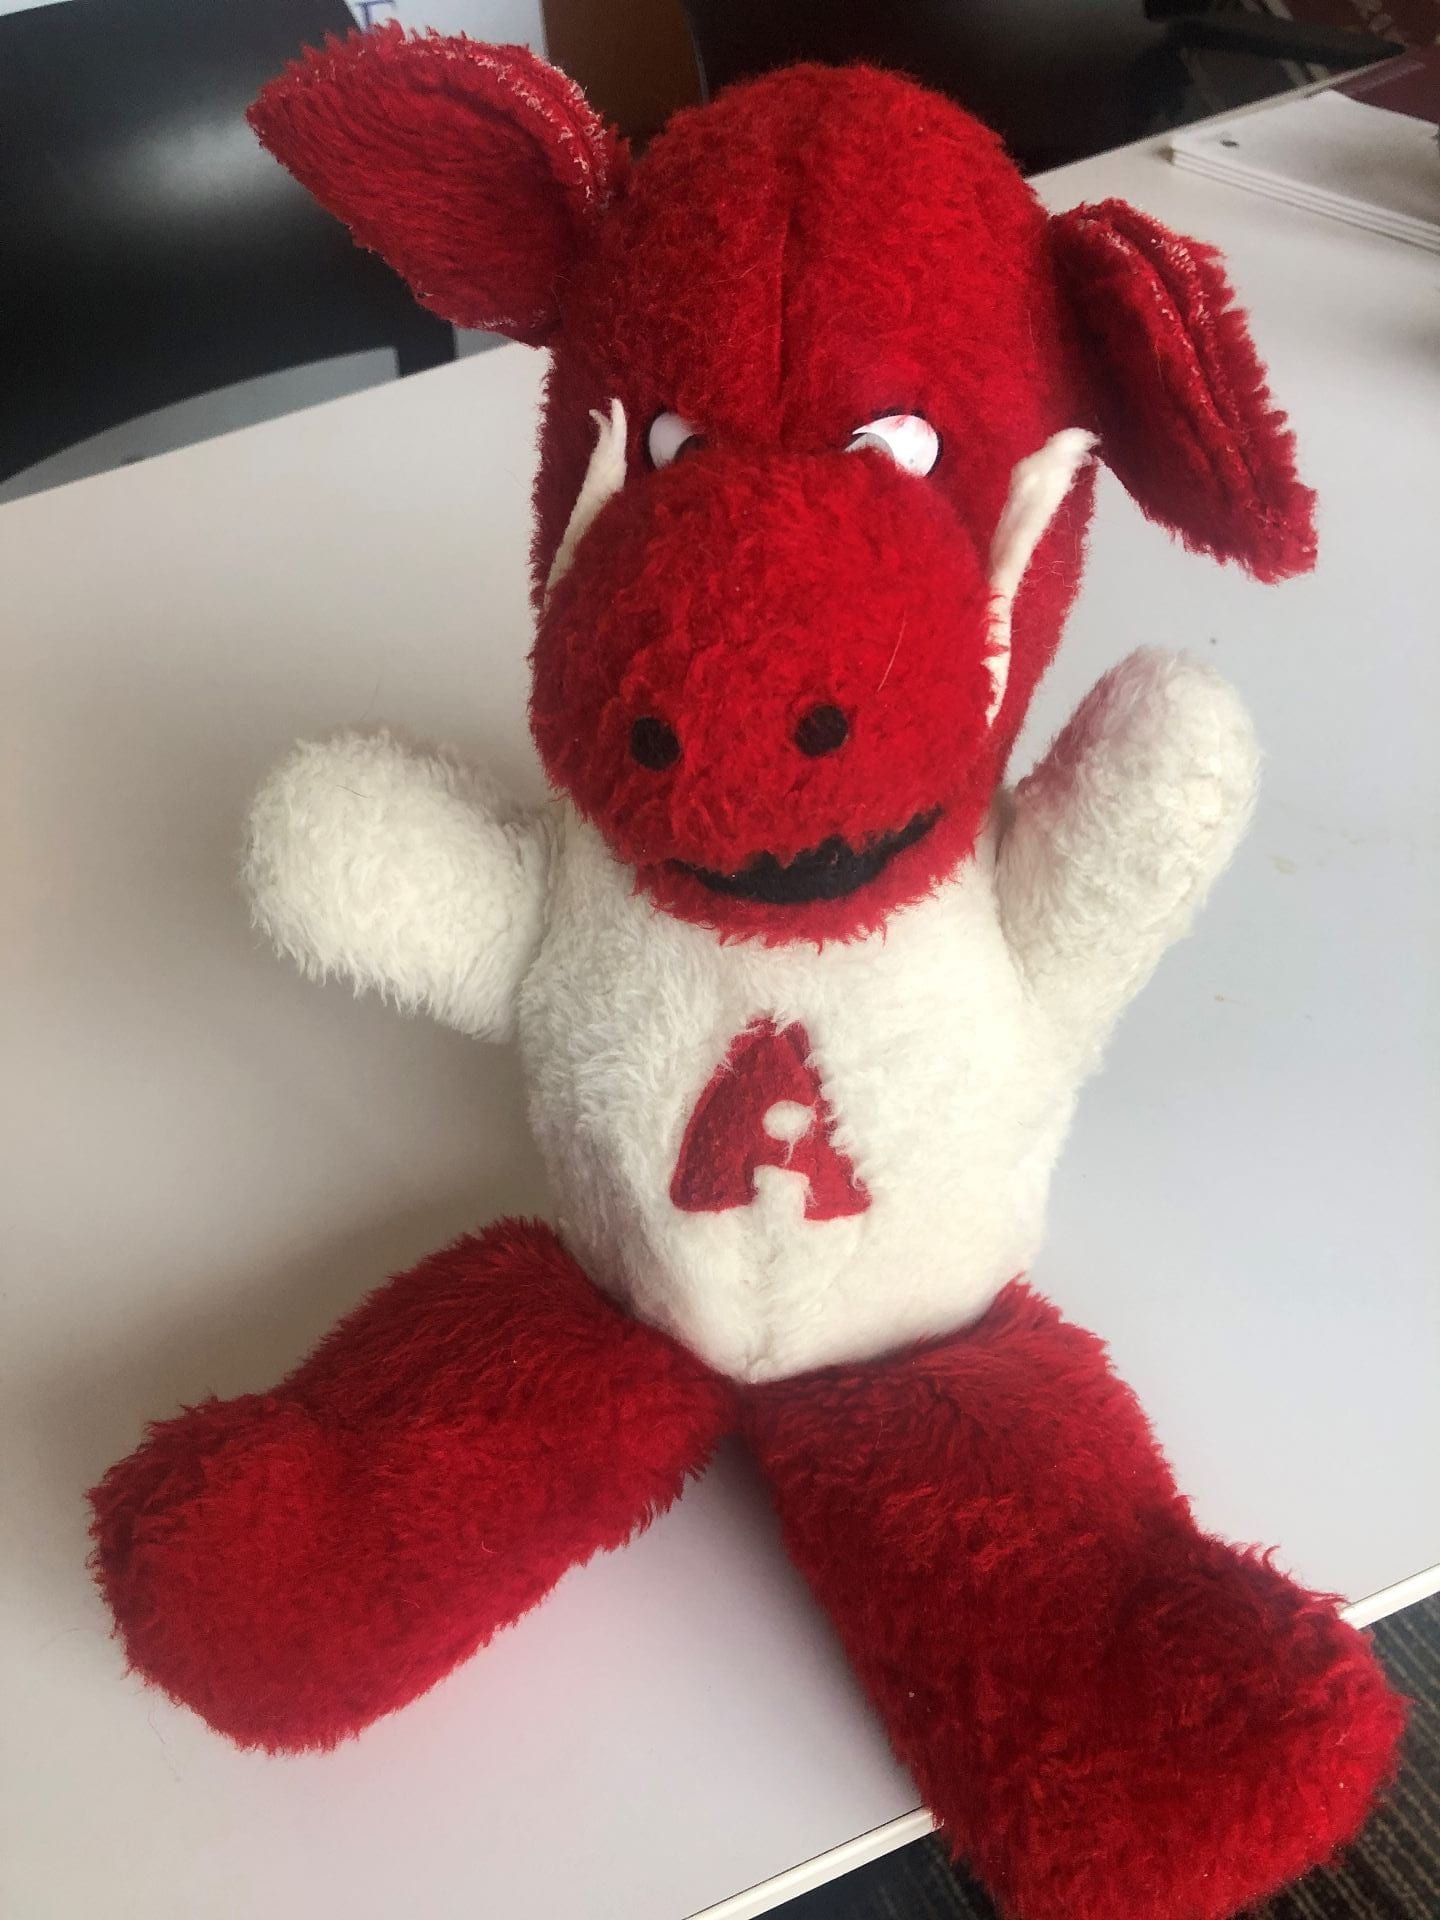 A Razorback plush with a red head and legs and white torso that has a red 